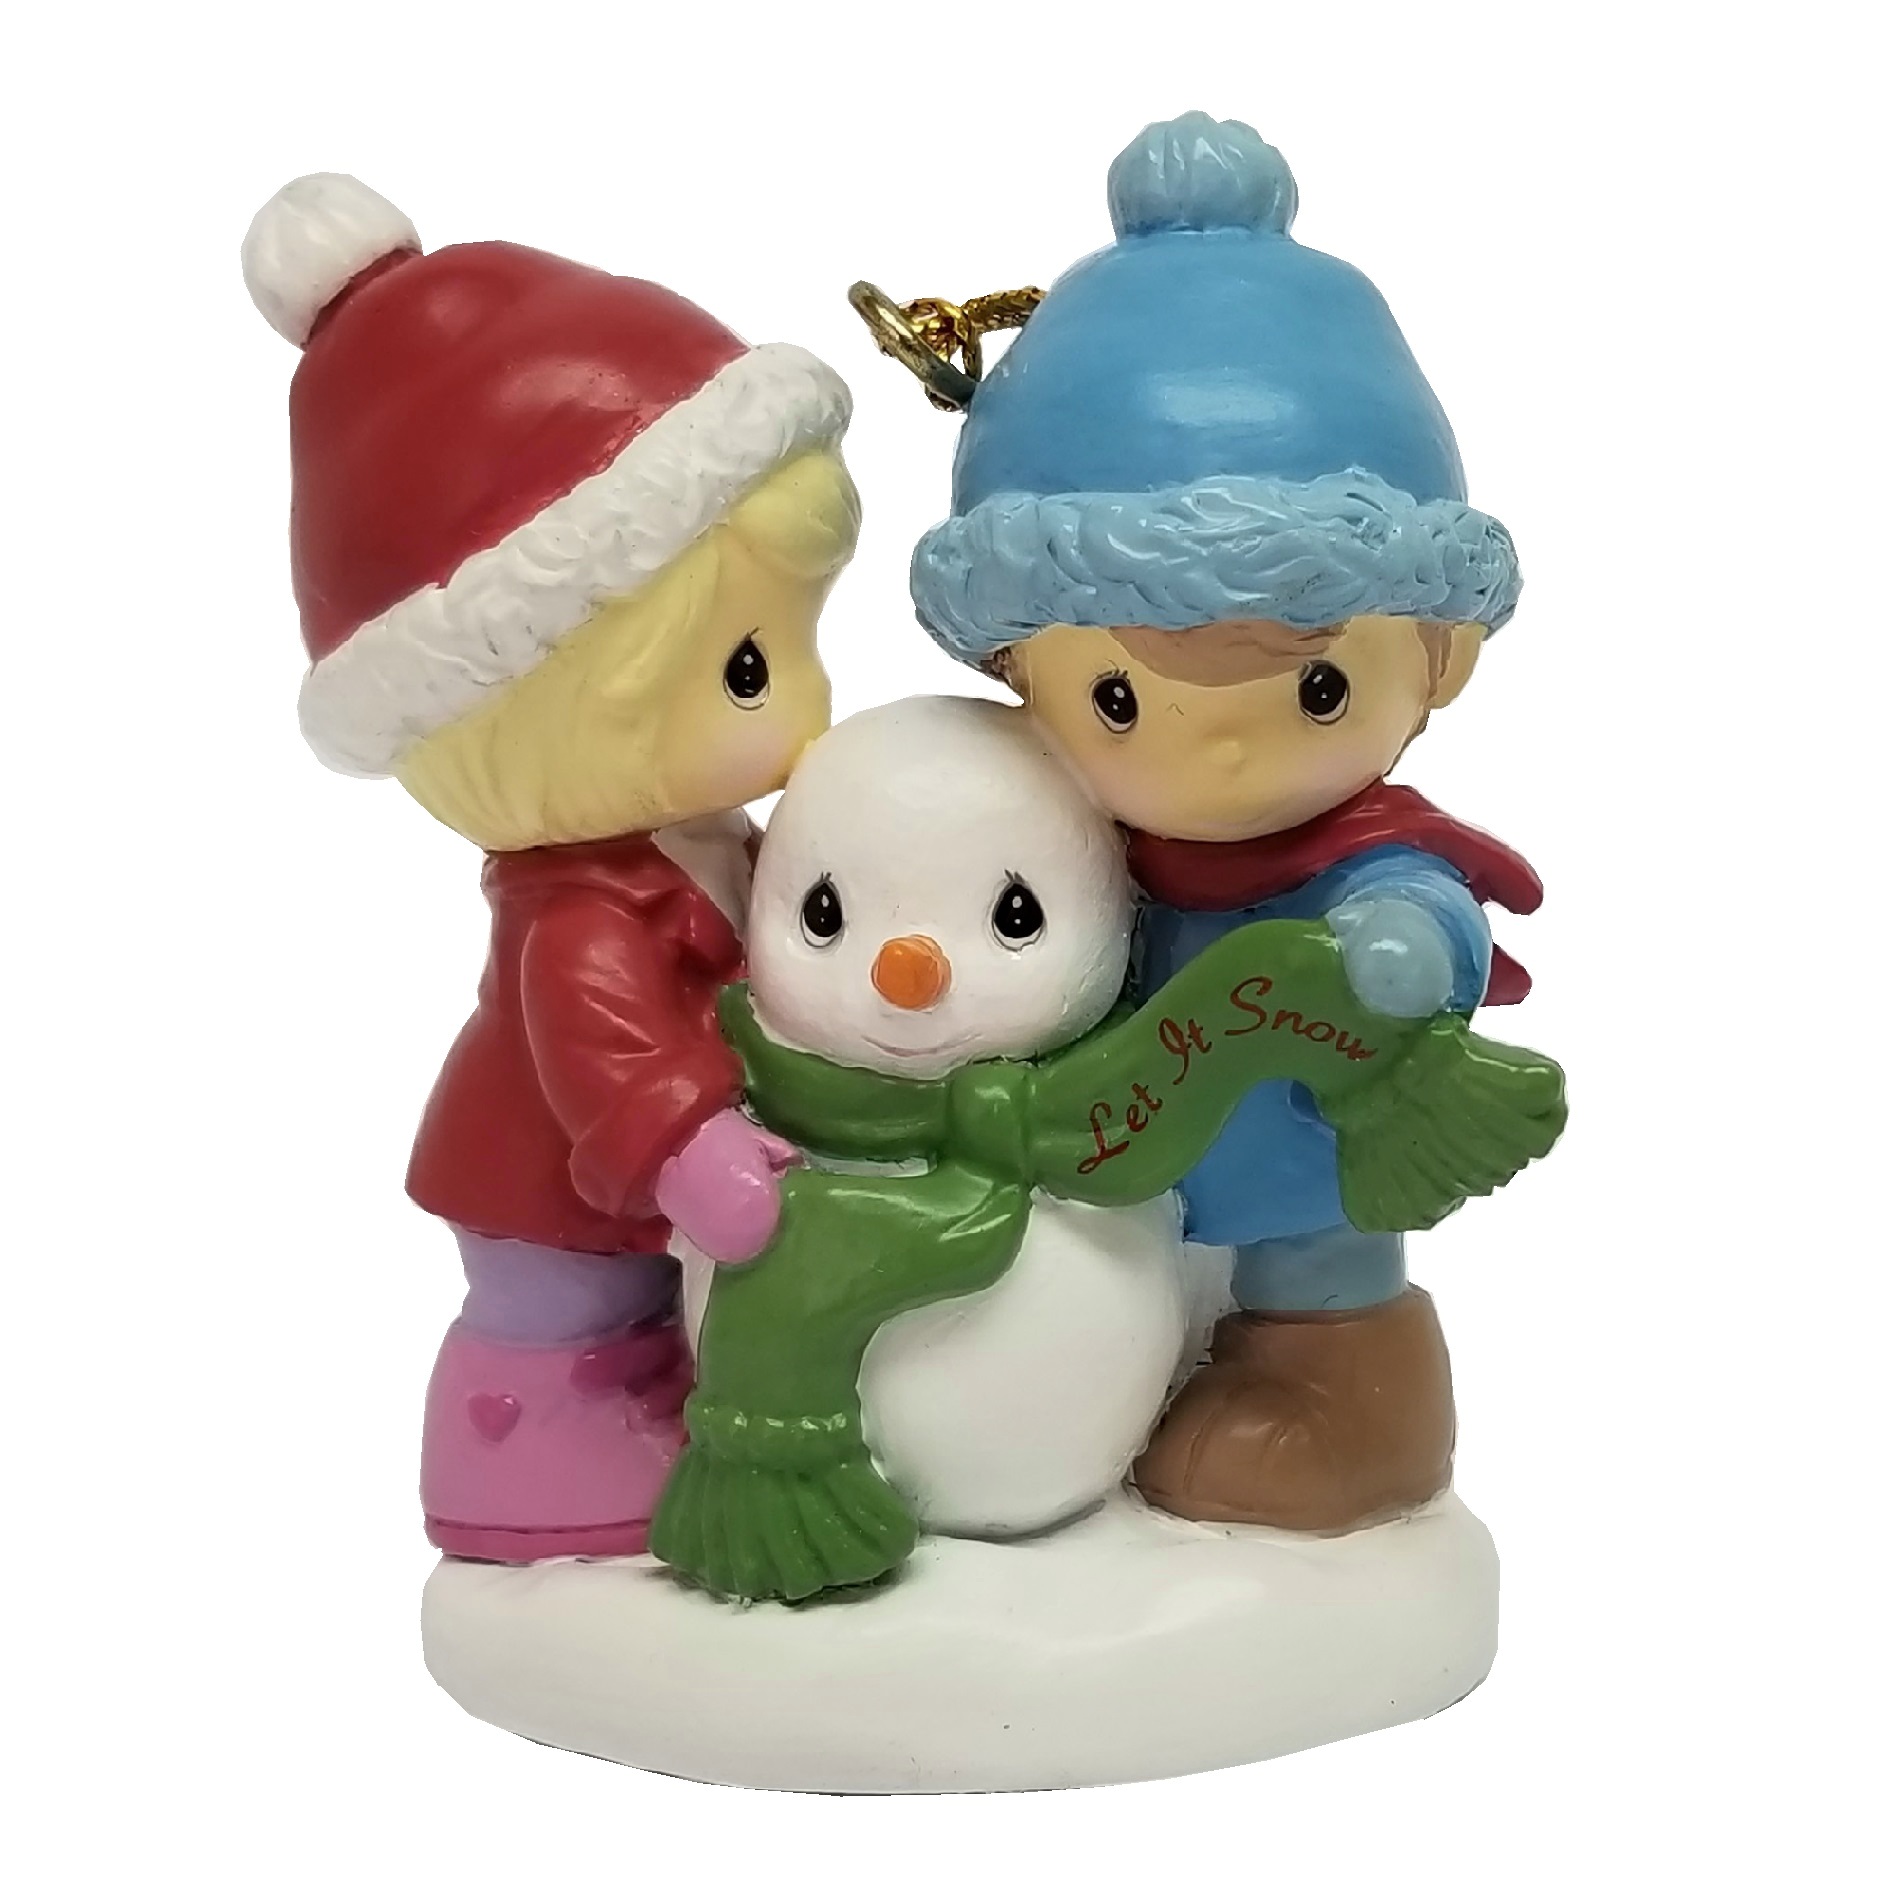 Precious Moments Licensed Kids with Snowman Christmas Ornament